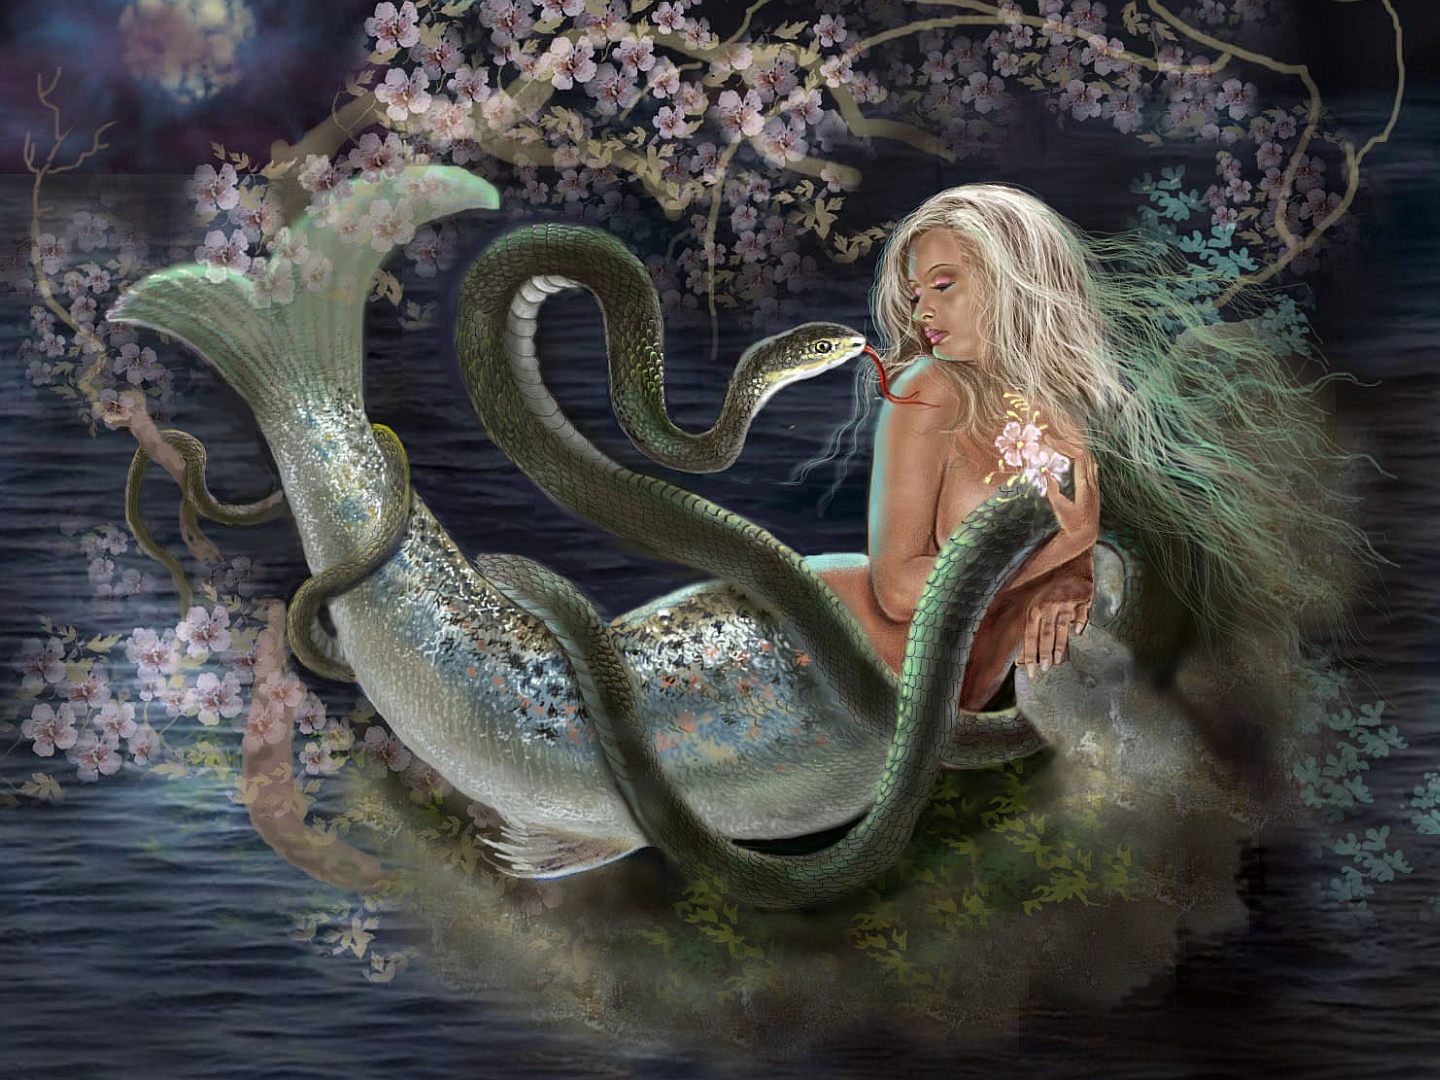 Mermaid Wallpapers Pictures Images HD Wallpapers Download Free Map Images Wallpaper [wallpaper376.blogspot.com]